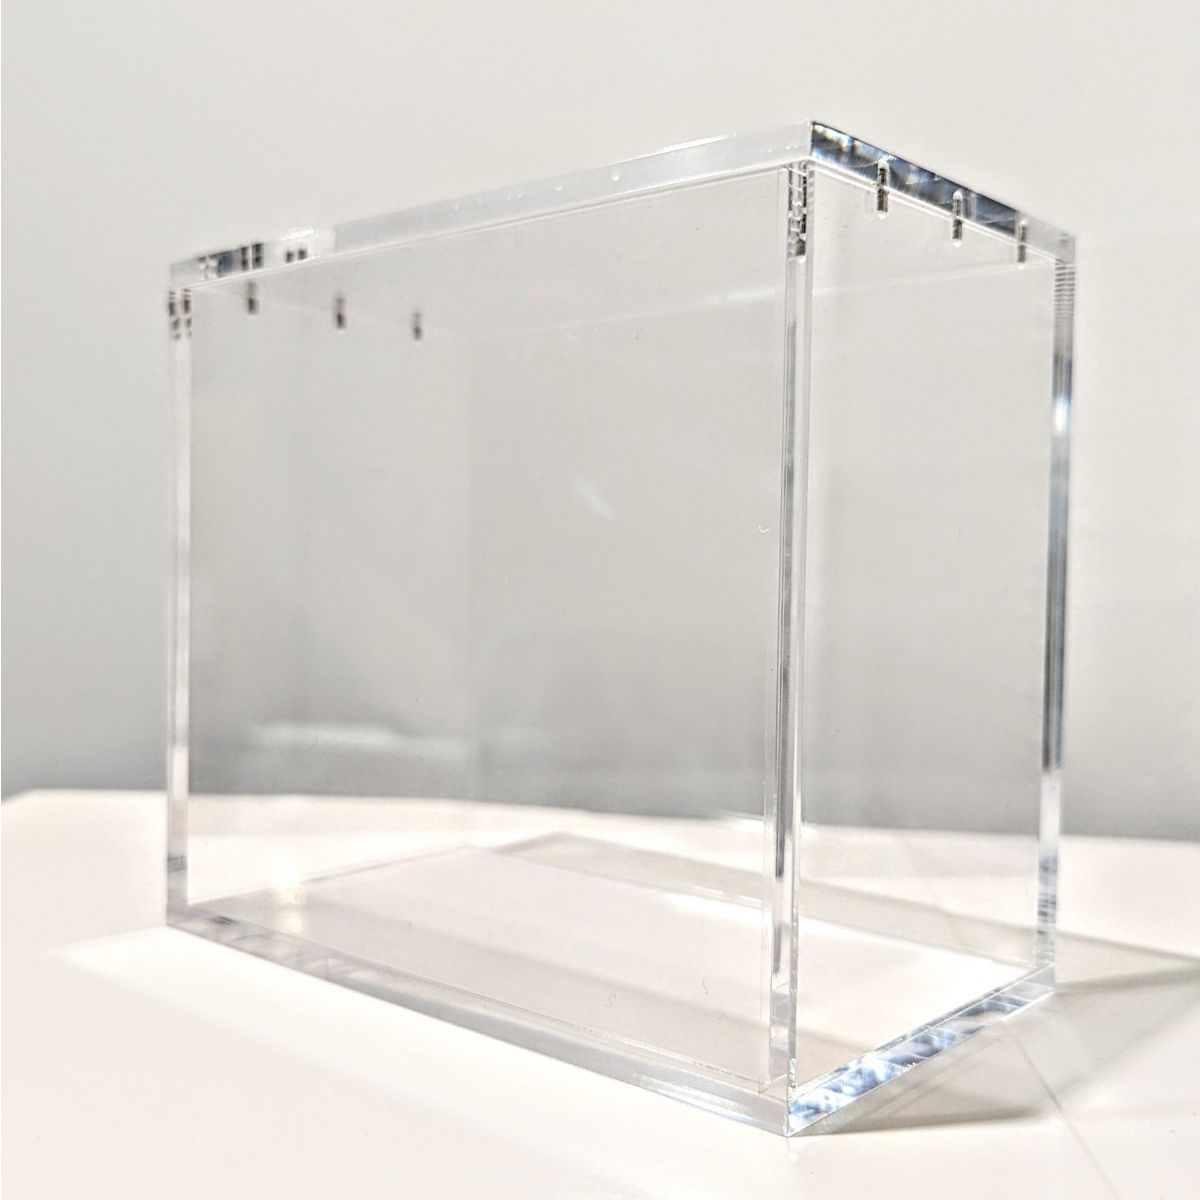 Treasurewise - Plexiglass Display Protection - Booster Box - Magnetic Lid